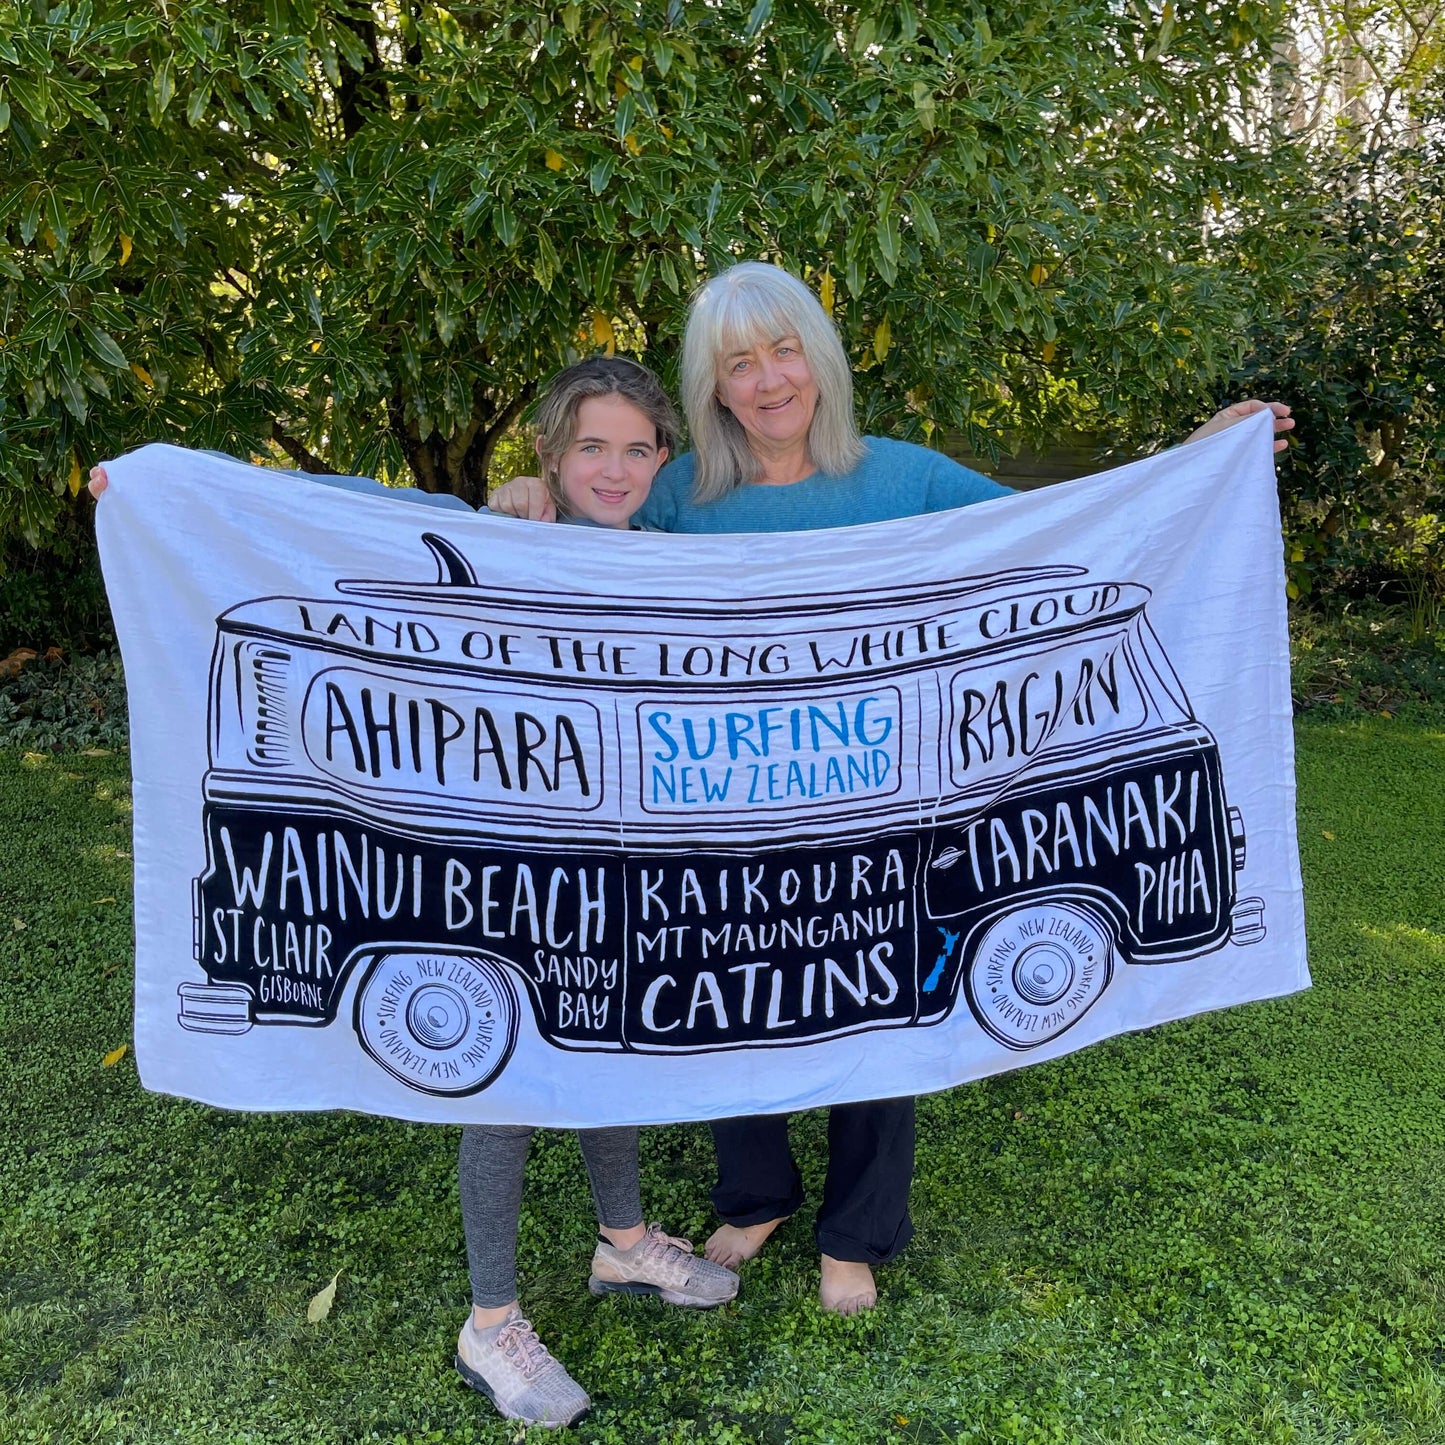 Grandmother & Grandaughter holding a large white beach towel with a Kombi van and names of New Zealand surf locations on it.